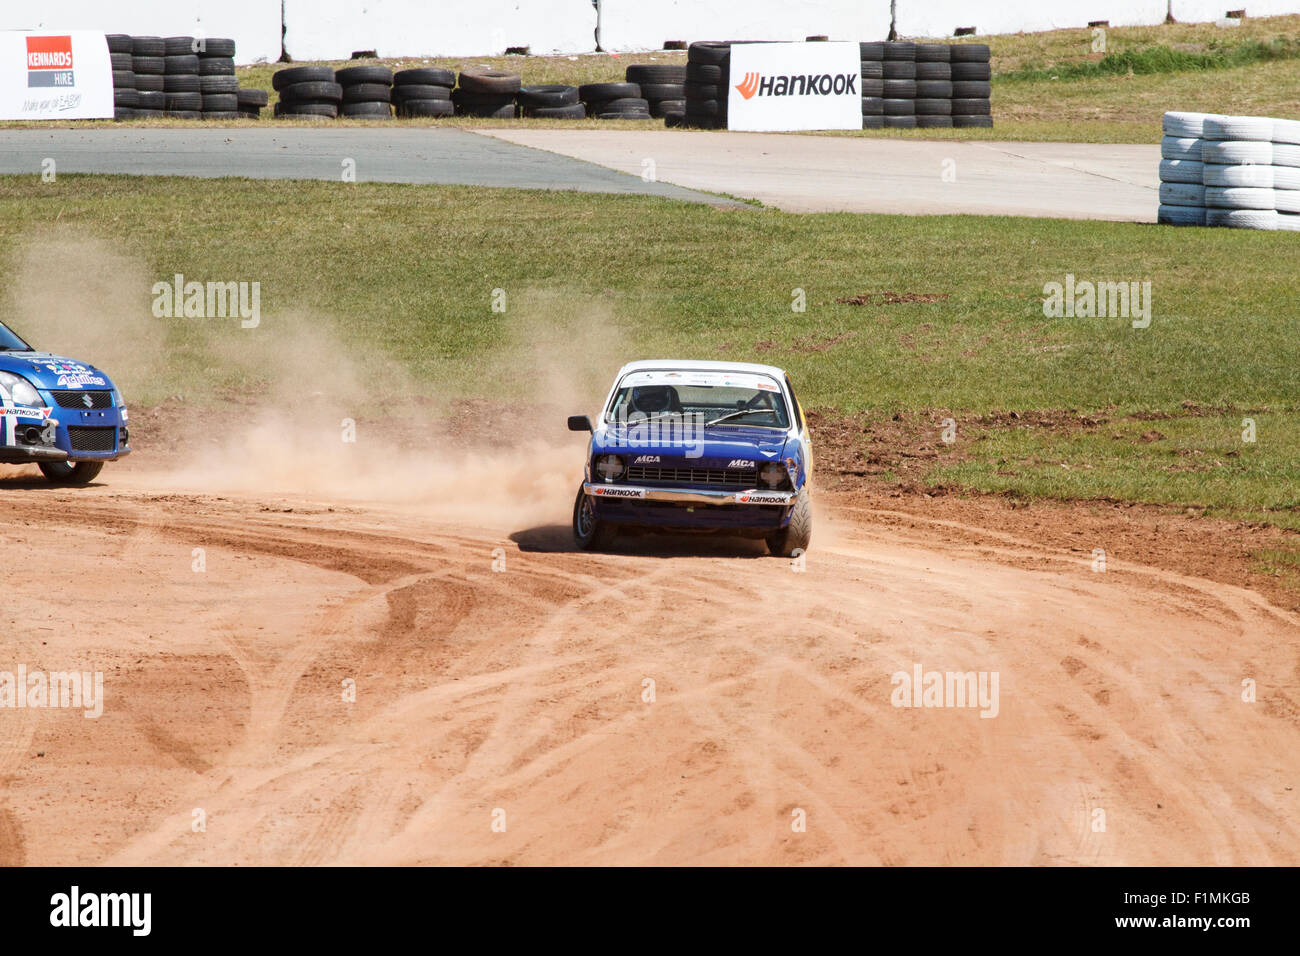 Brisbane, Australia. 4th September, 2015. Day 1 of the inaugural round of the new Sidchrome Extreme Rallycross Championship Series being held at Lakeside Park, Brisbane, the capital city of Queensland, Australia, on 4th and 5th September 2015 Credit:  John Quixley/Alamy Live News Stock Photo